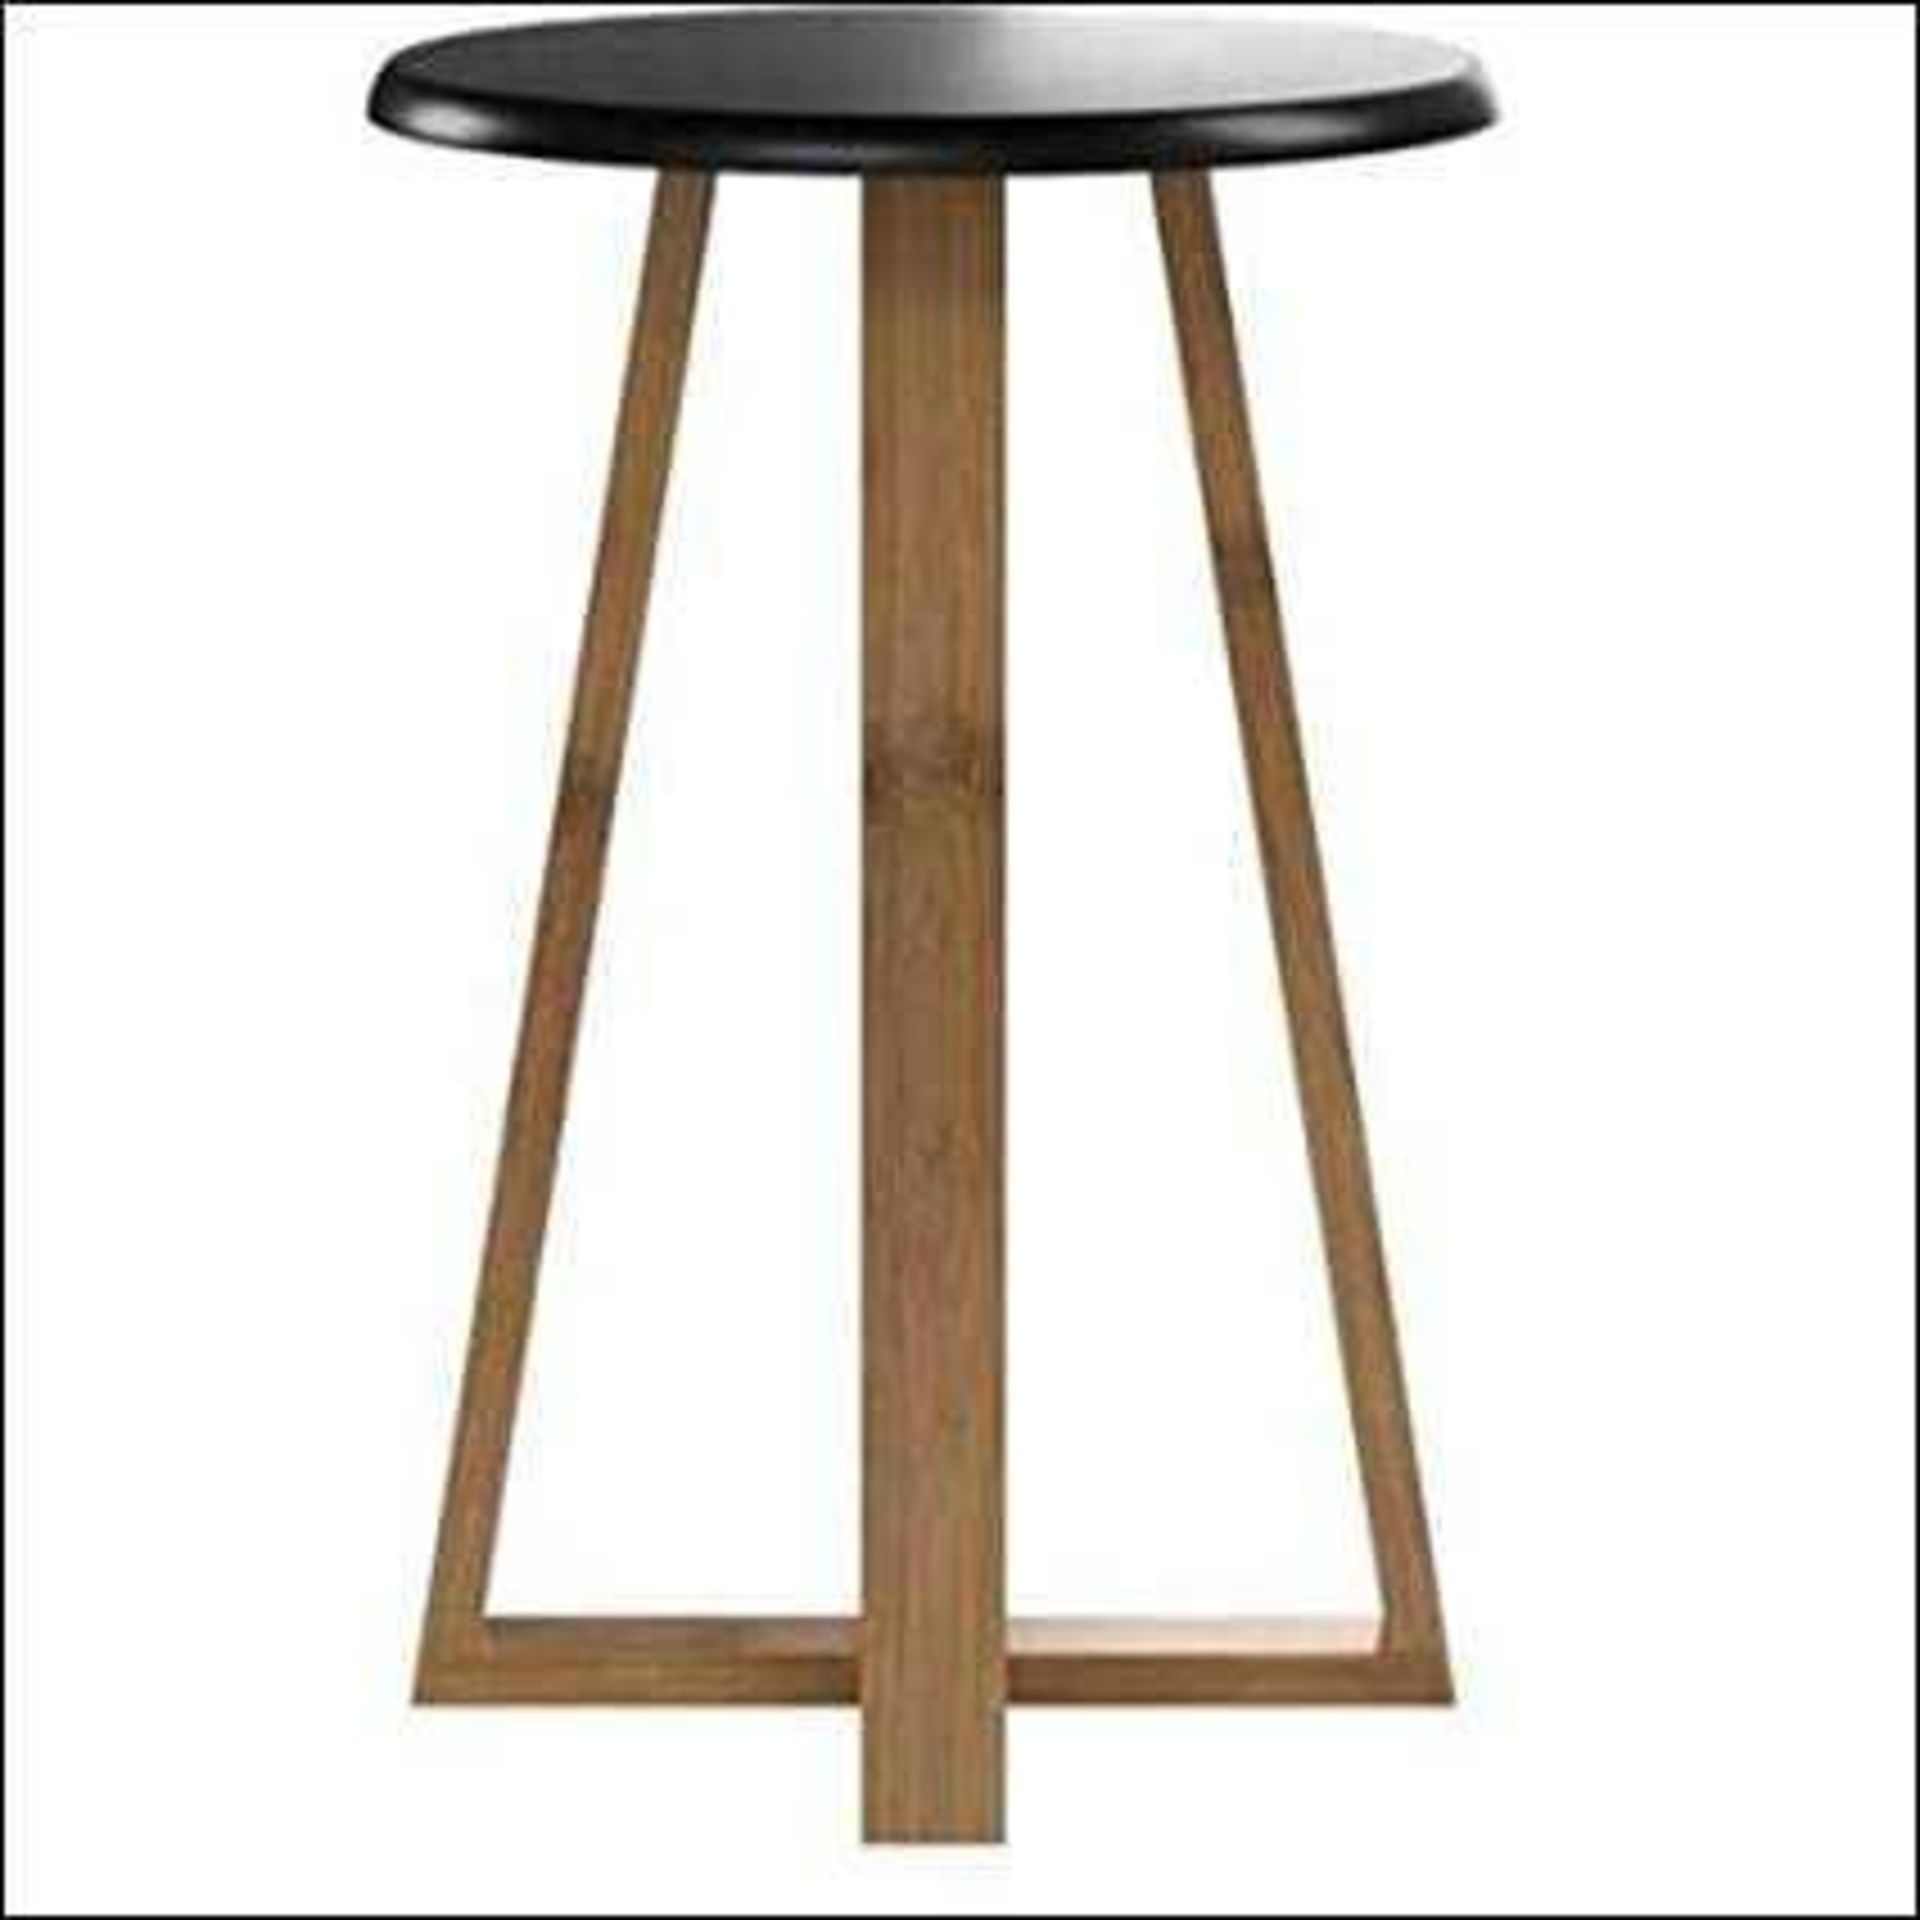 RRP £40 Each Boxed Maison By Premier Viborg Round Stool Bamboo With Black Top